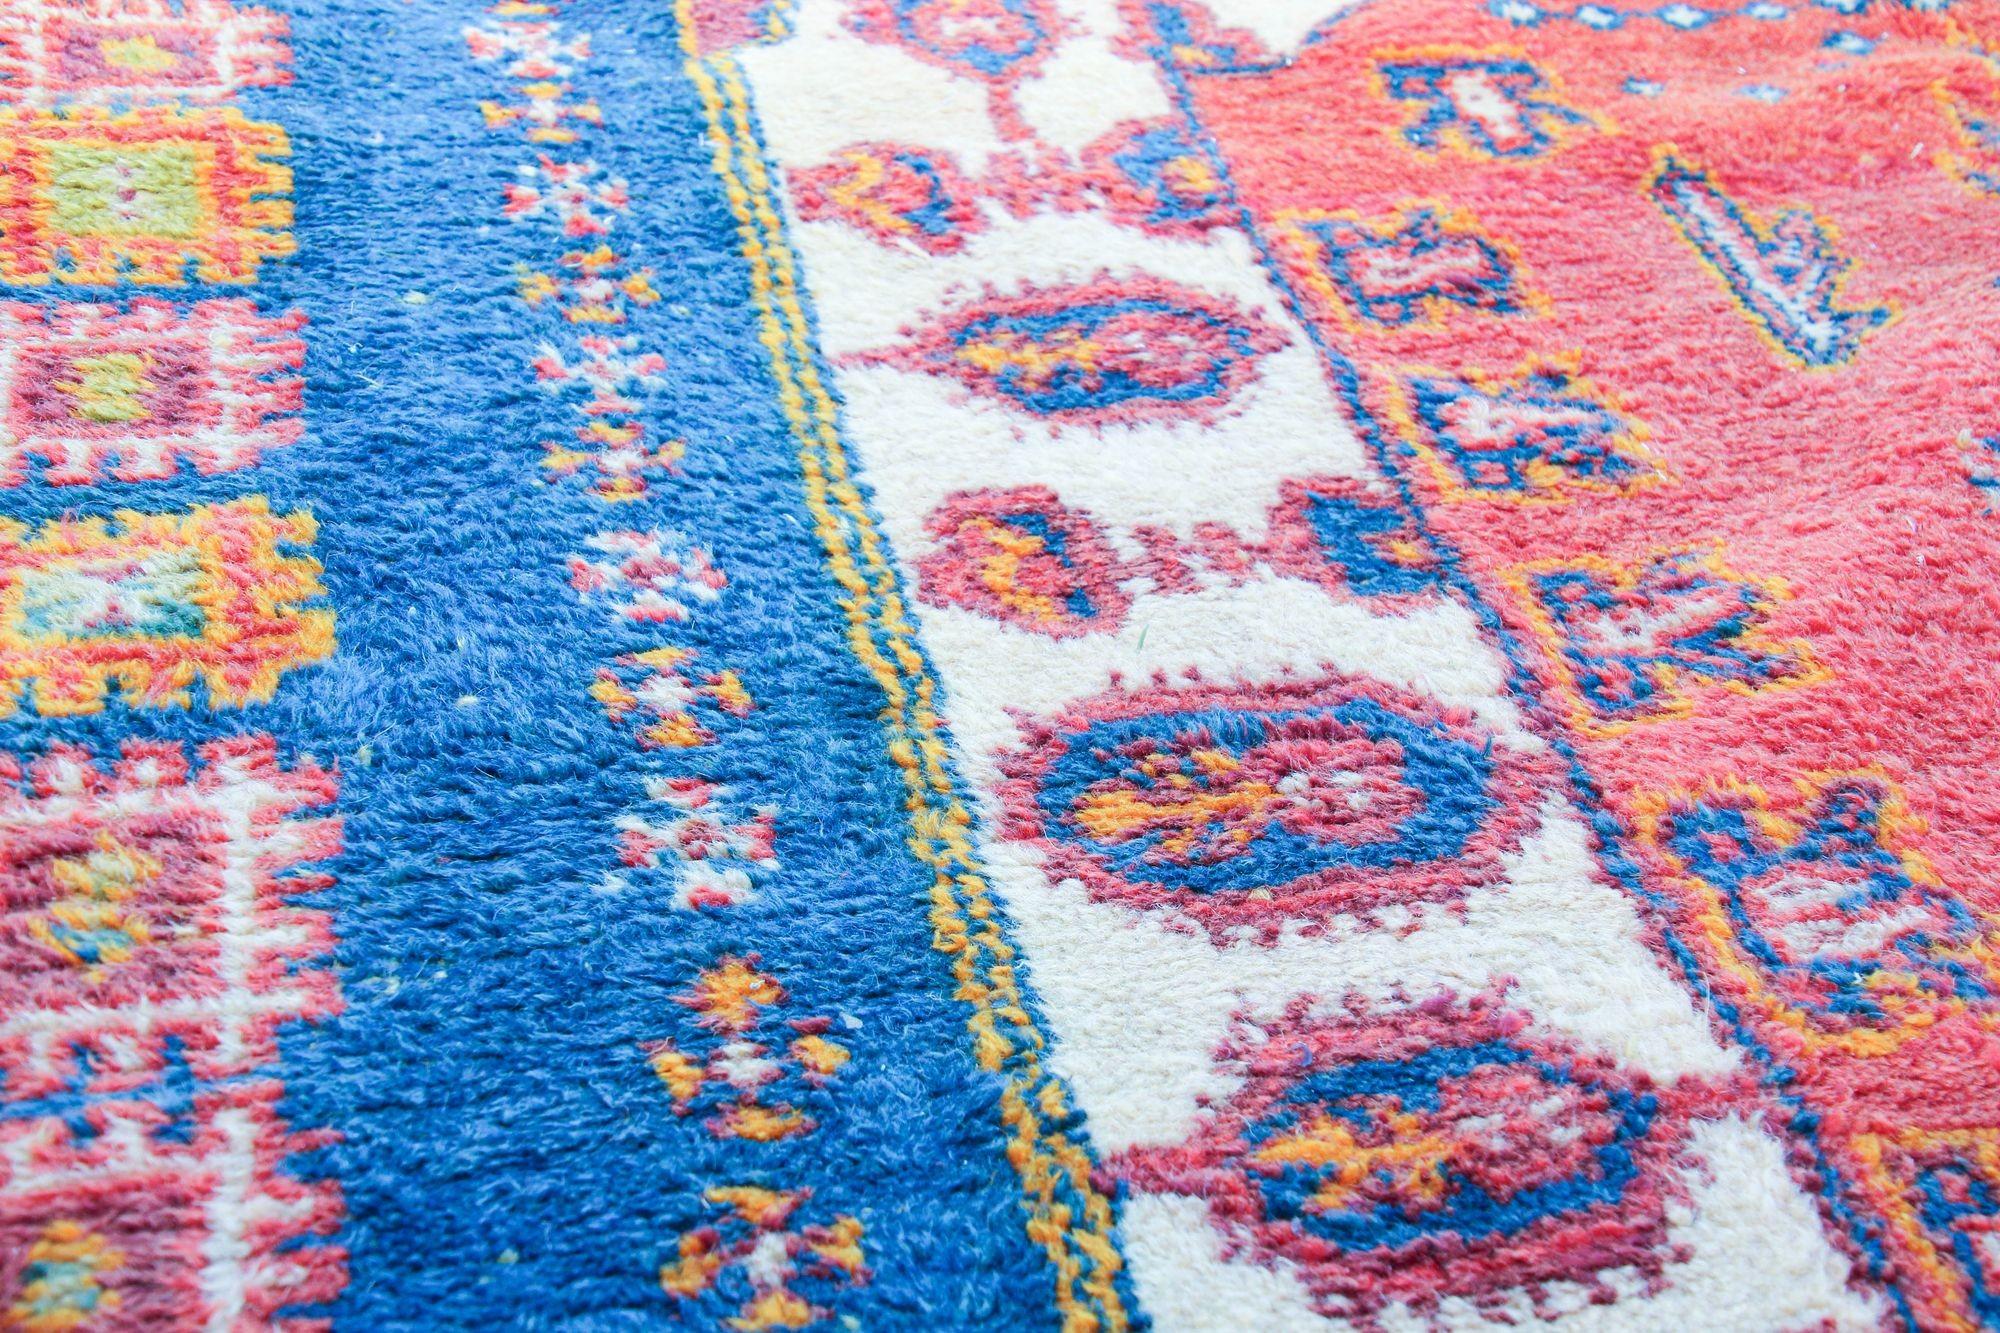 1960s Moroccan Berber Rug in Royal Blue, Pink and Orange Colors For Sale 11